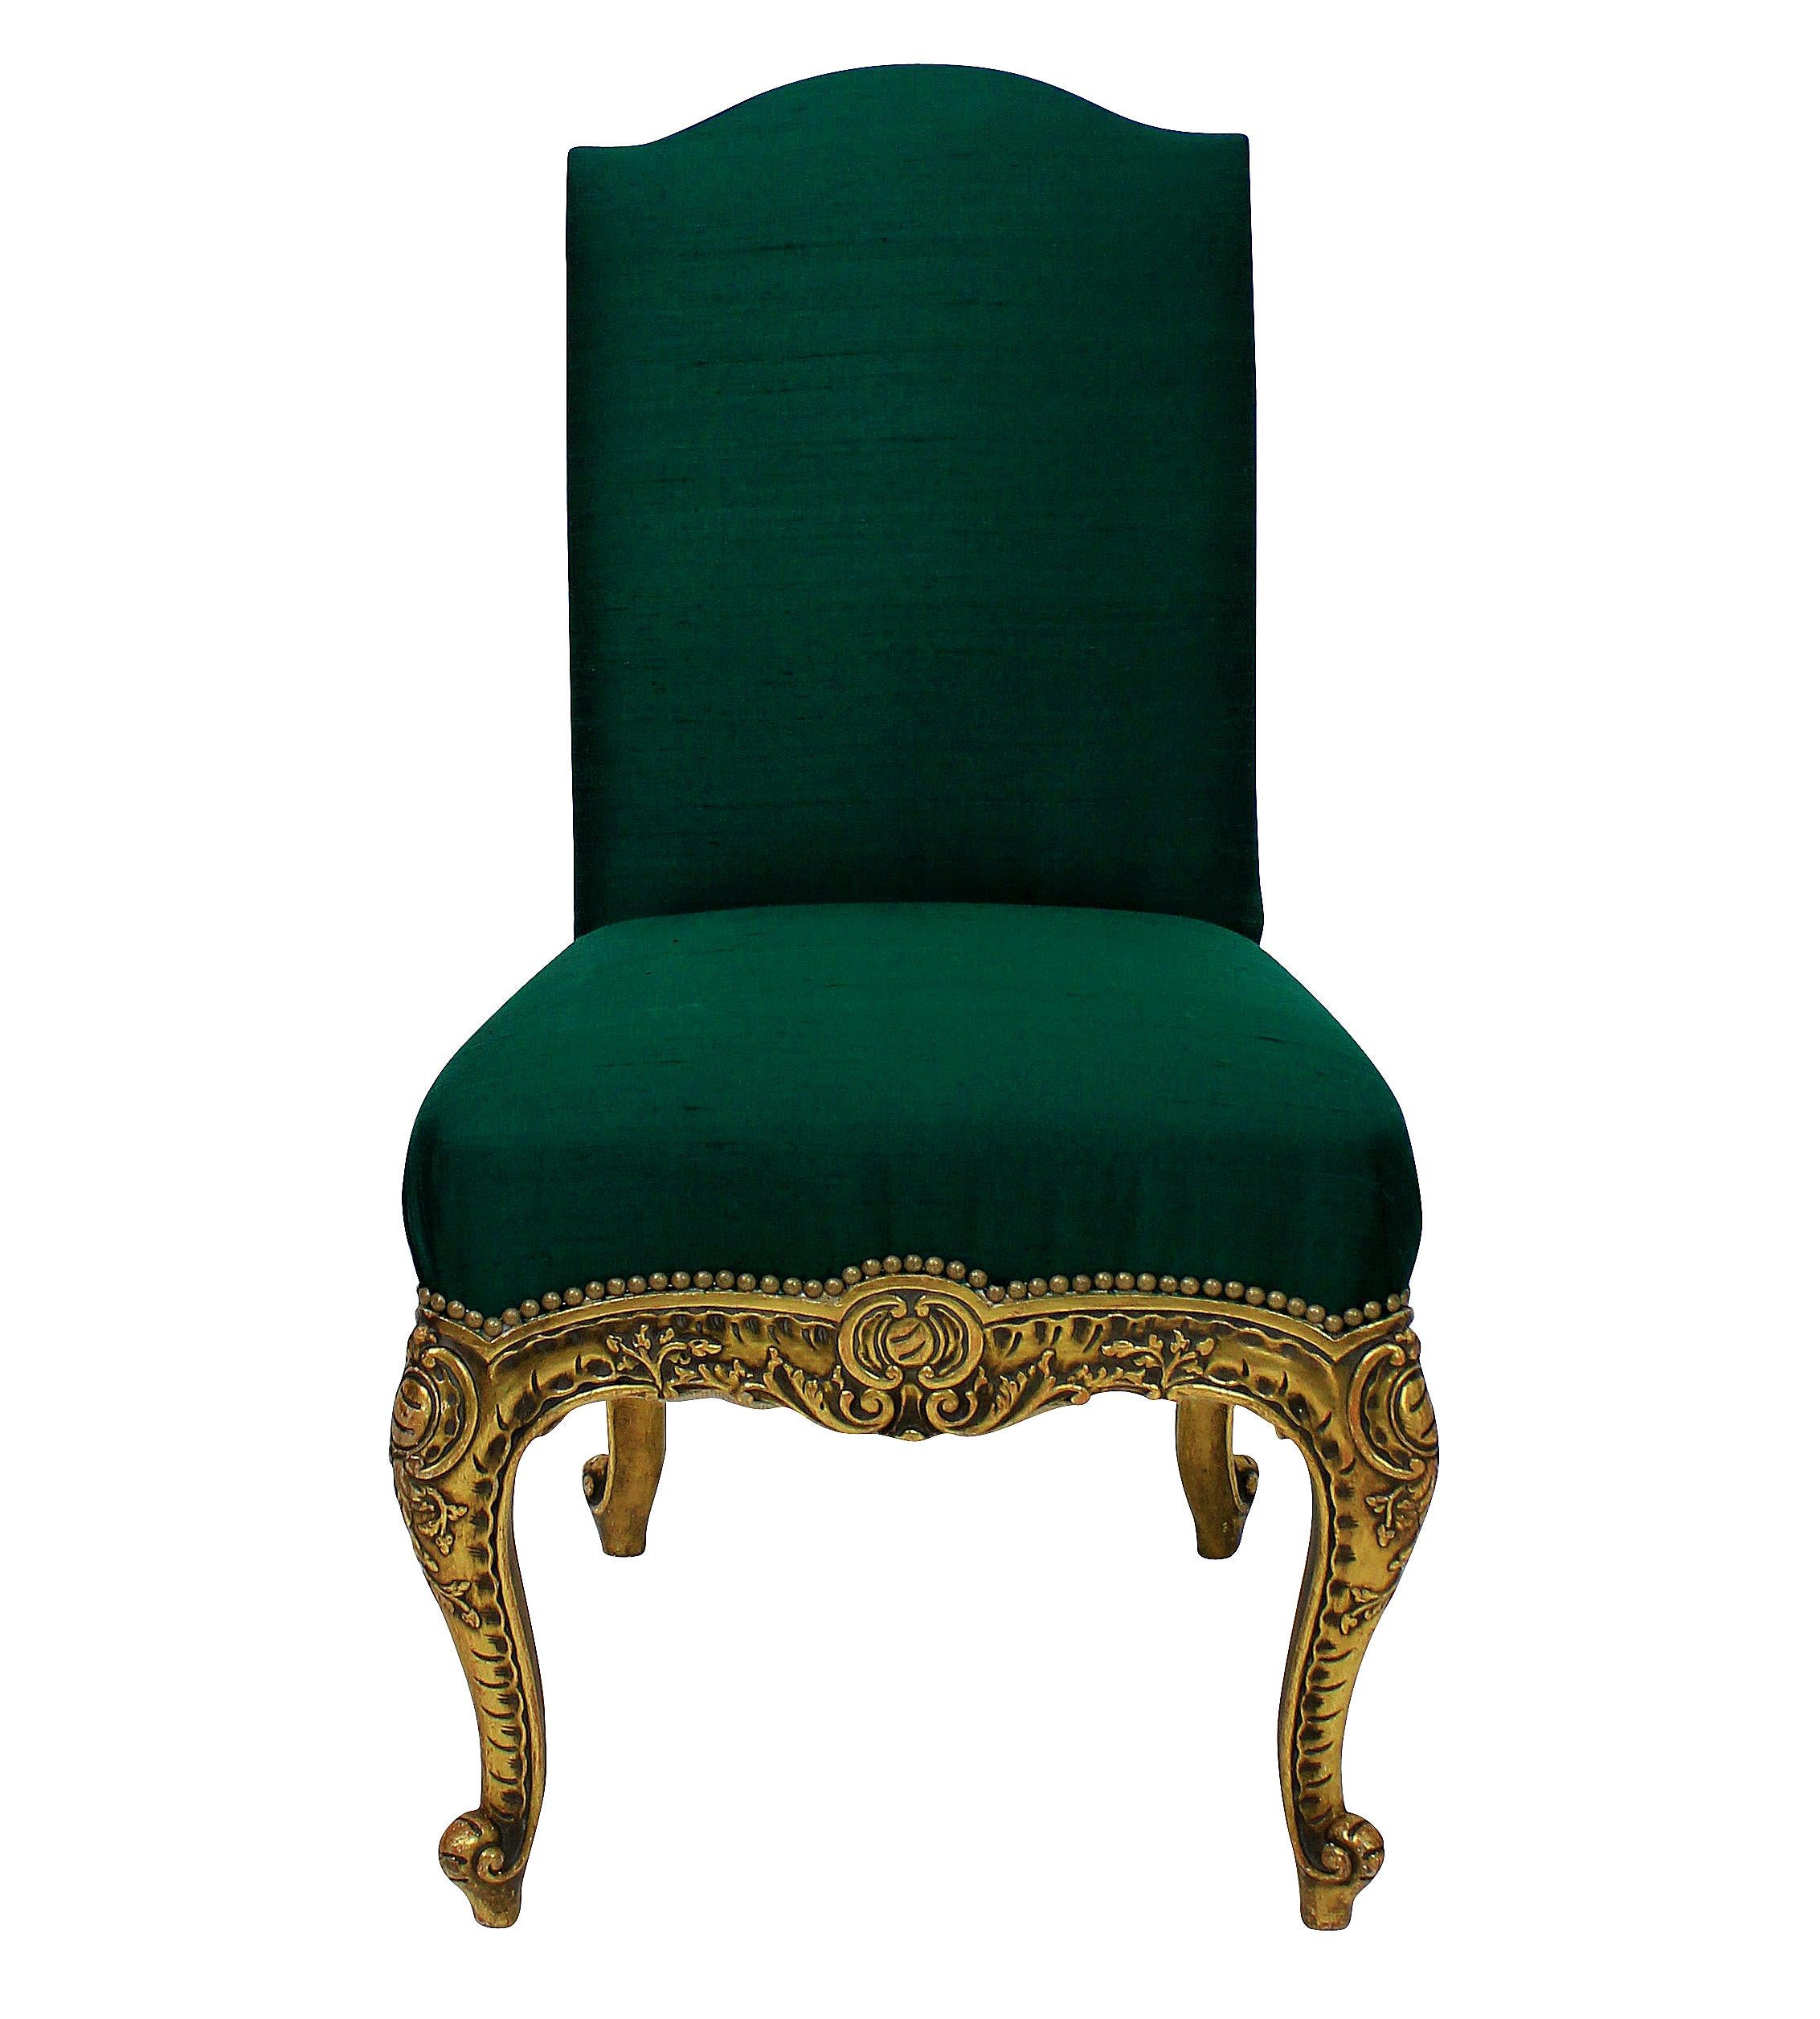 A pair of Spanish carved giltwood side chairs with cabriole legs and newly upholstered in emerald silk with gold studding.
 